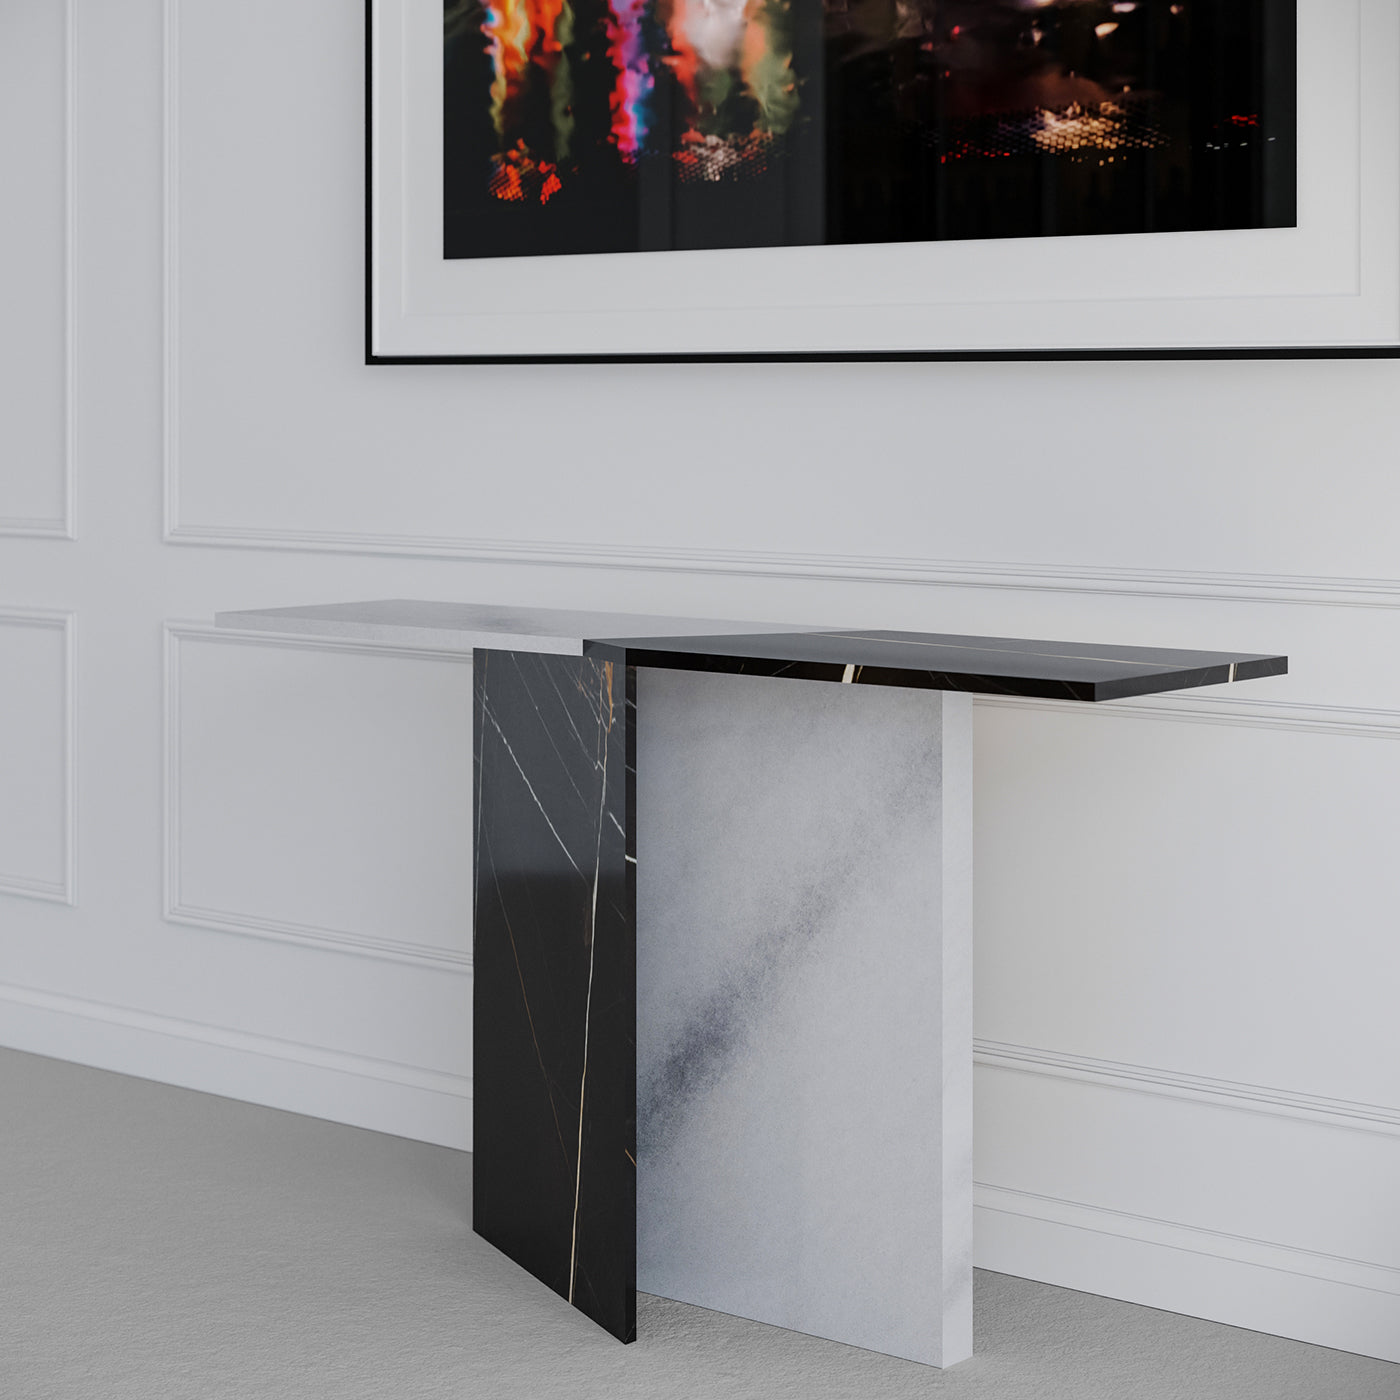 Zion Sahara Noir and Bianco T Marble Console by Paolo Ciacci - Alternative view 2